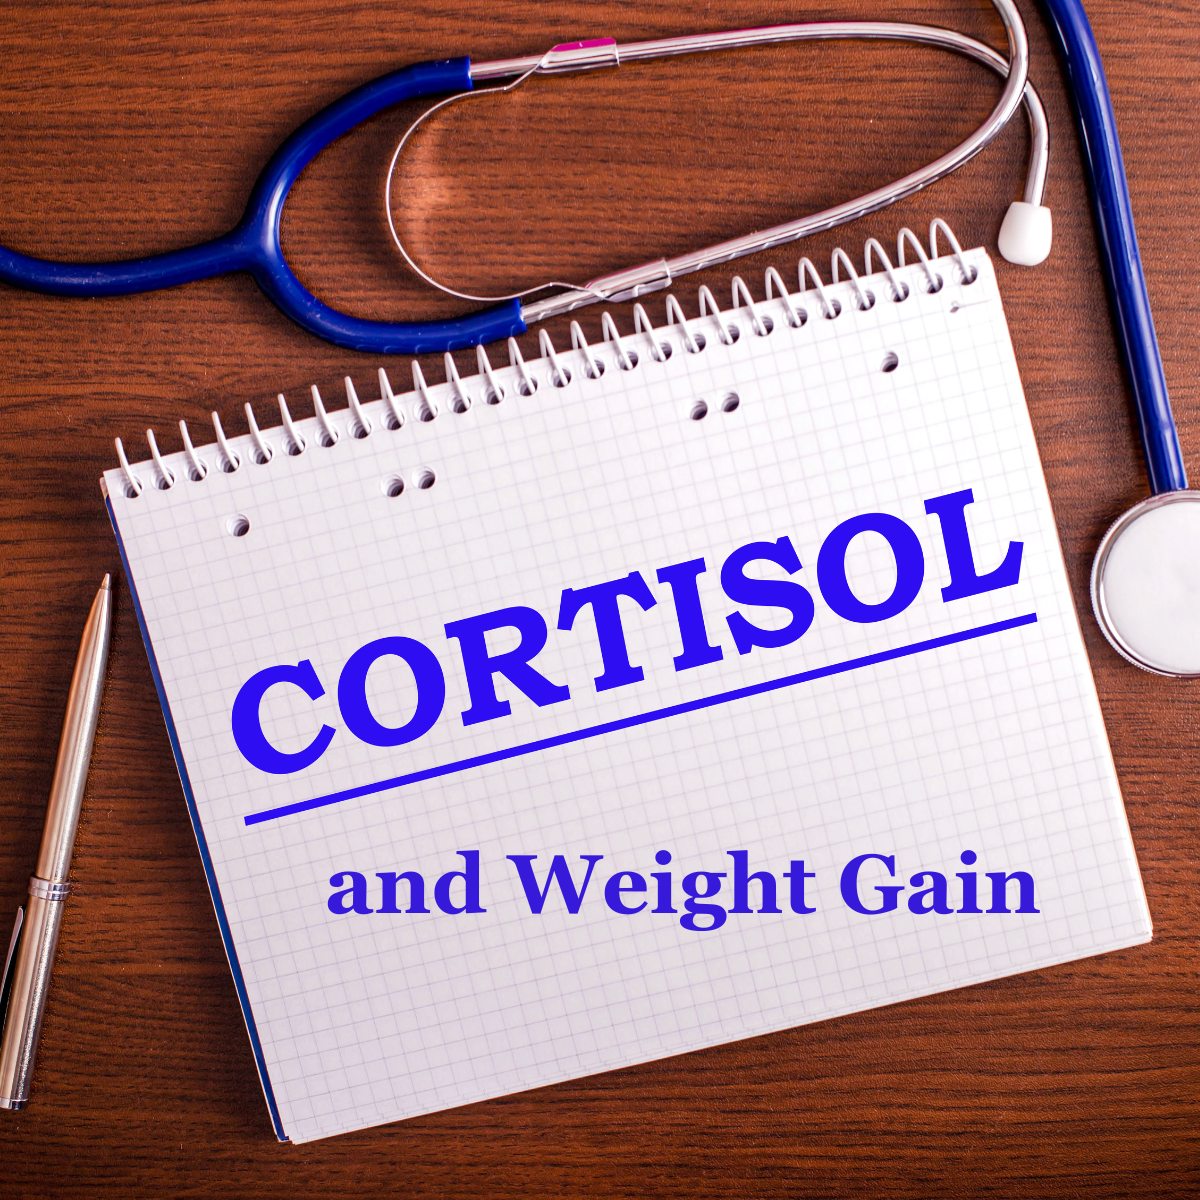 5 Tips to Lower Cortisol and Lose Stubborn Fat